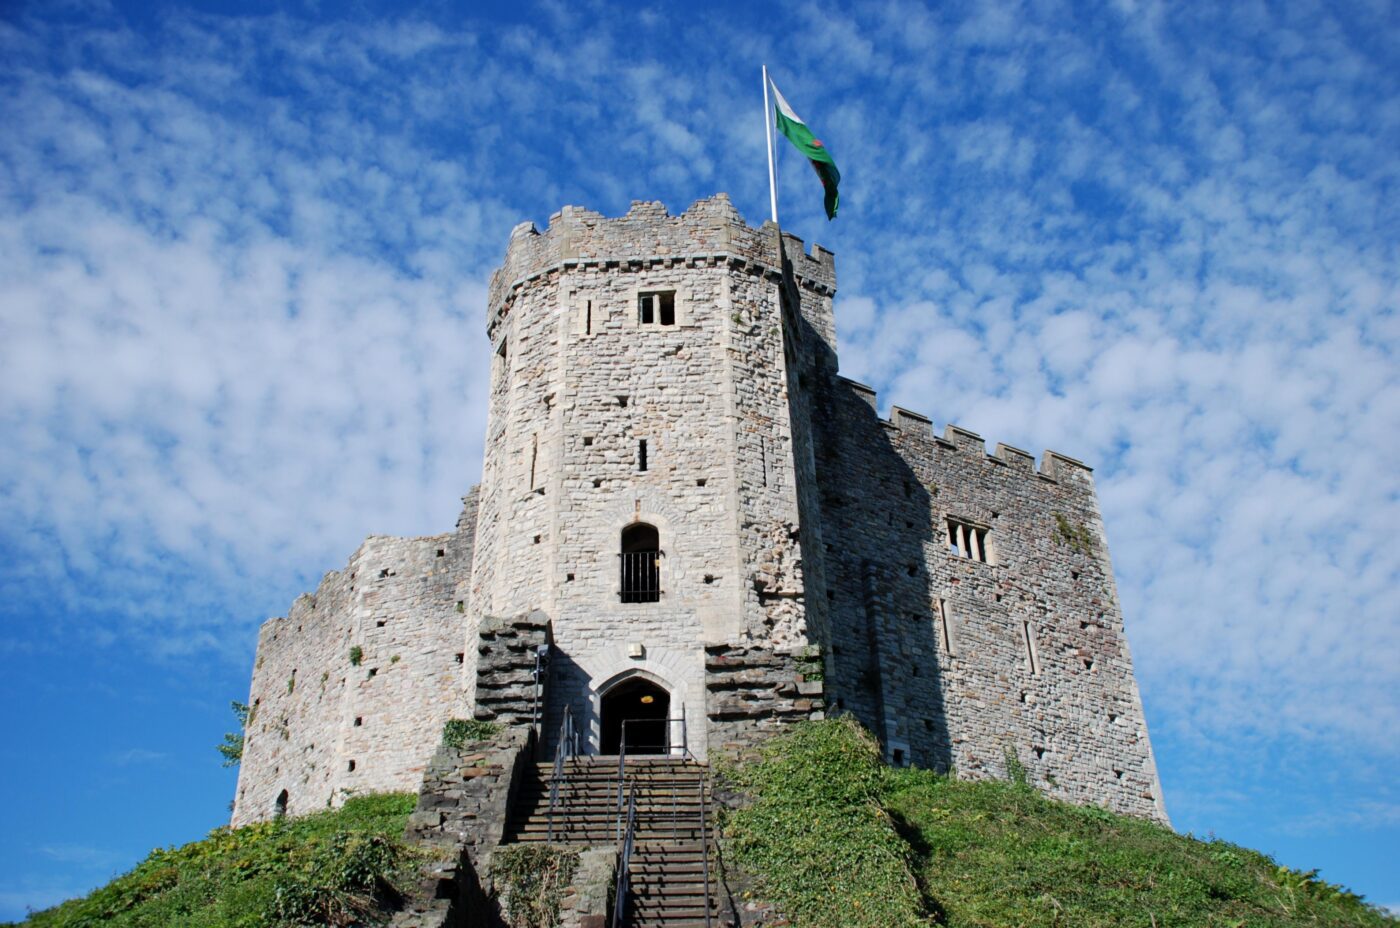 Image of Cardiff Castle